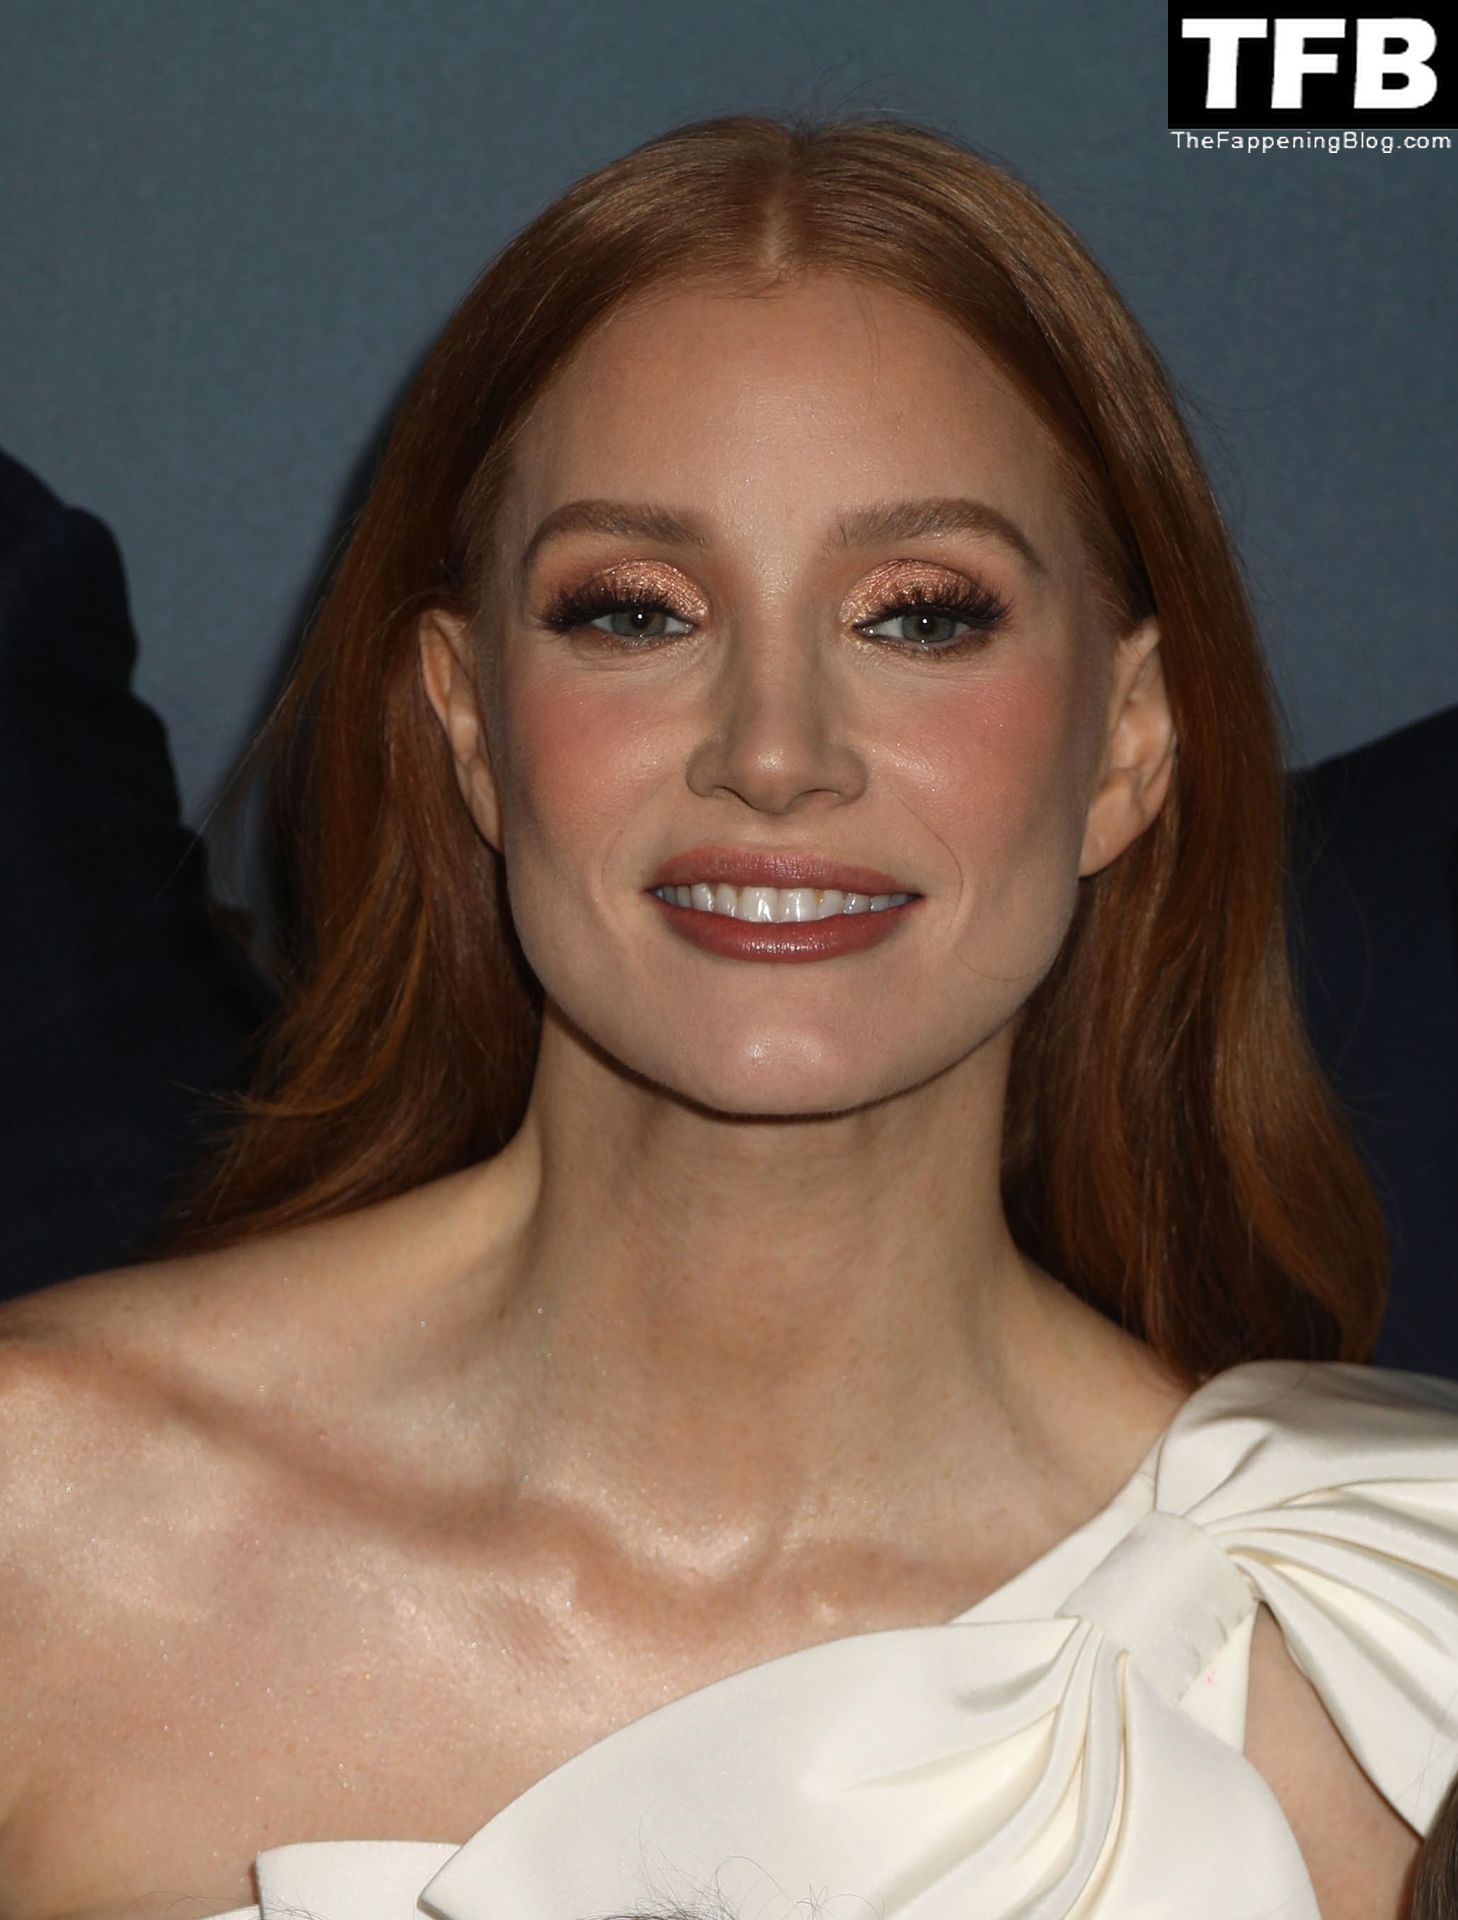 Jessica-Chastain-Sexy-The-Fappening-Blog-54-1.jpg